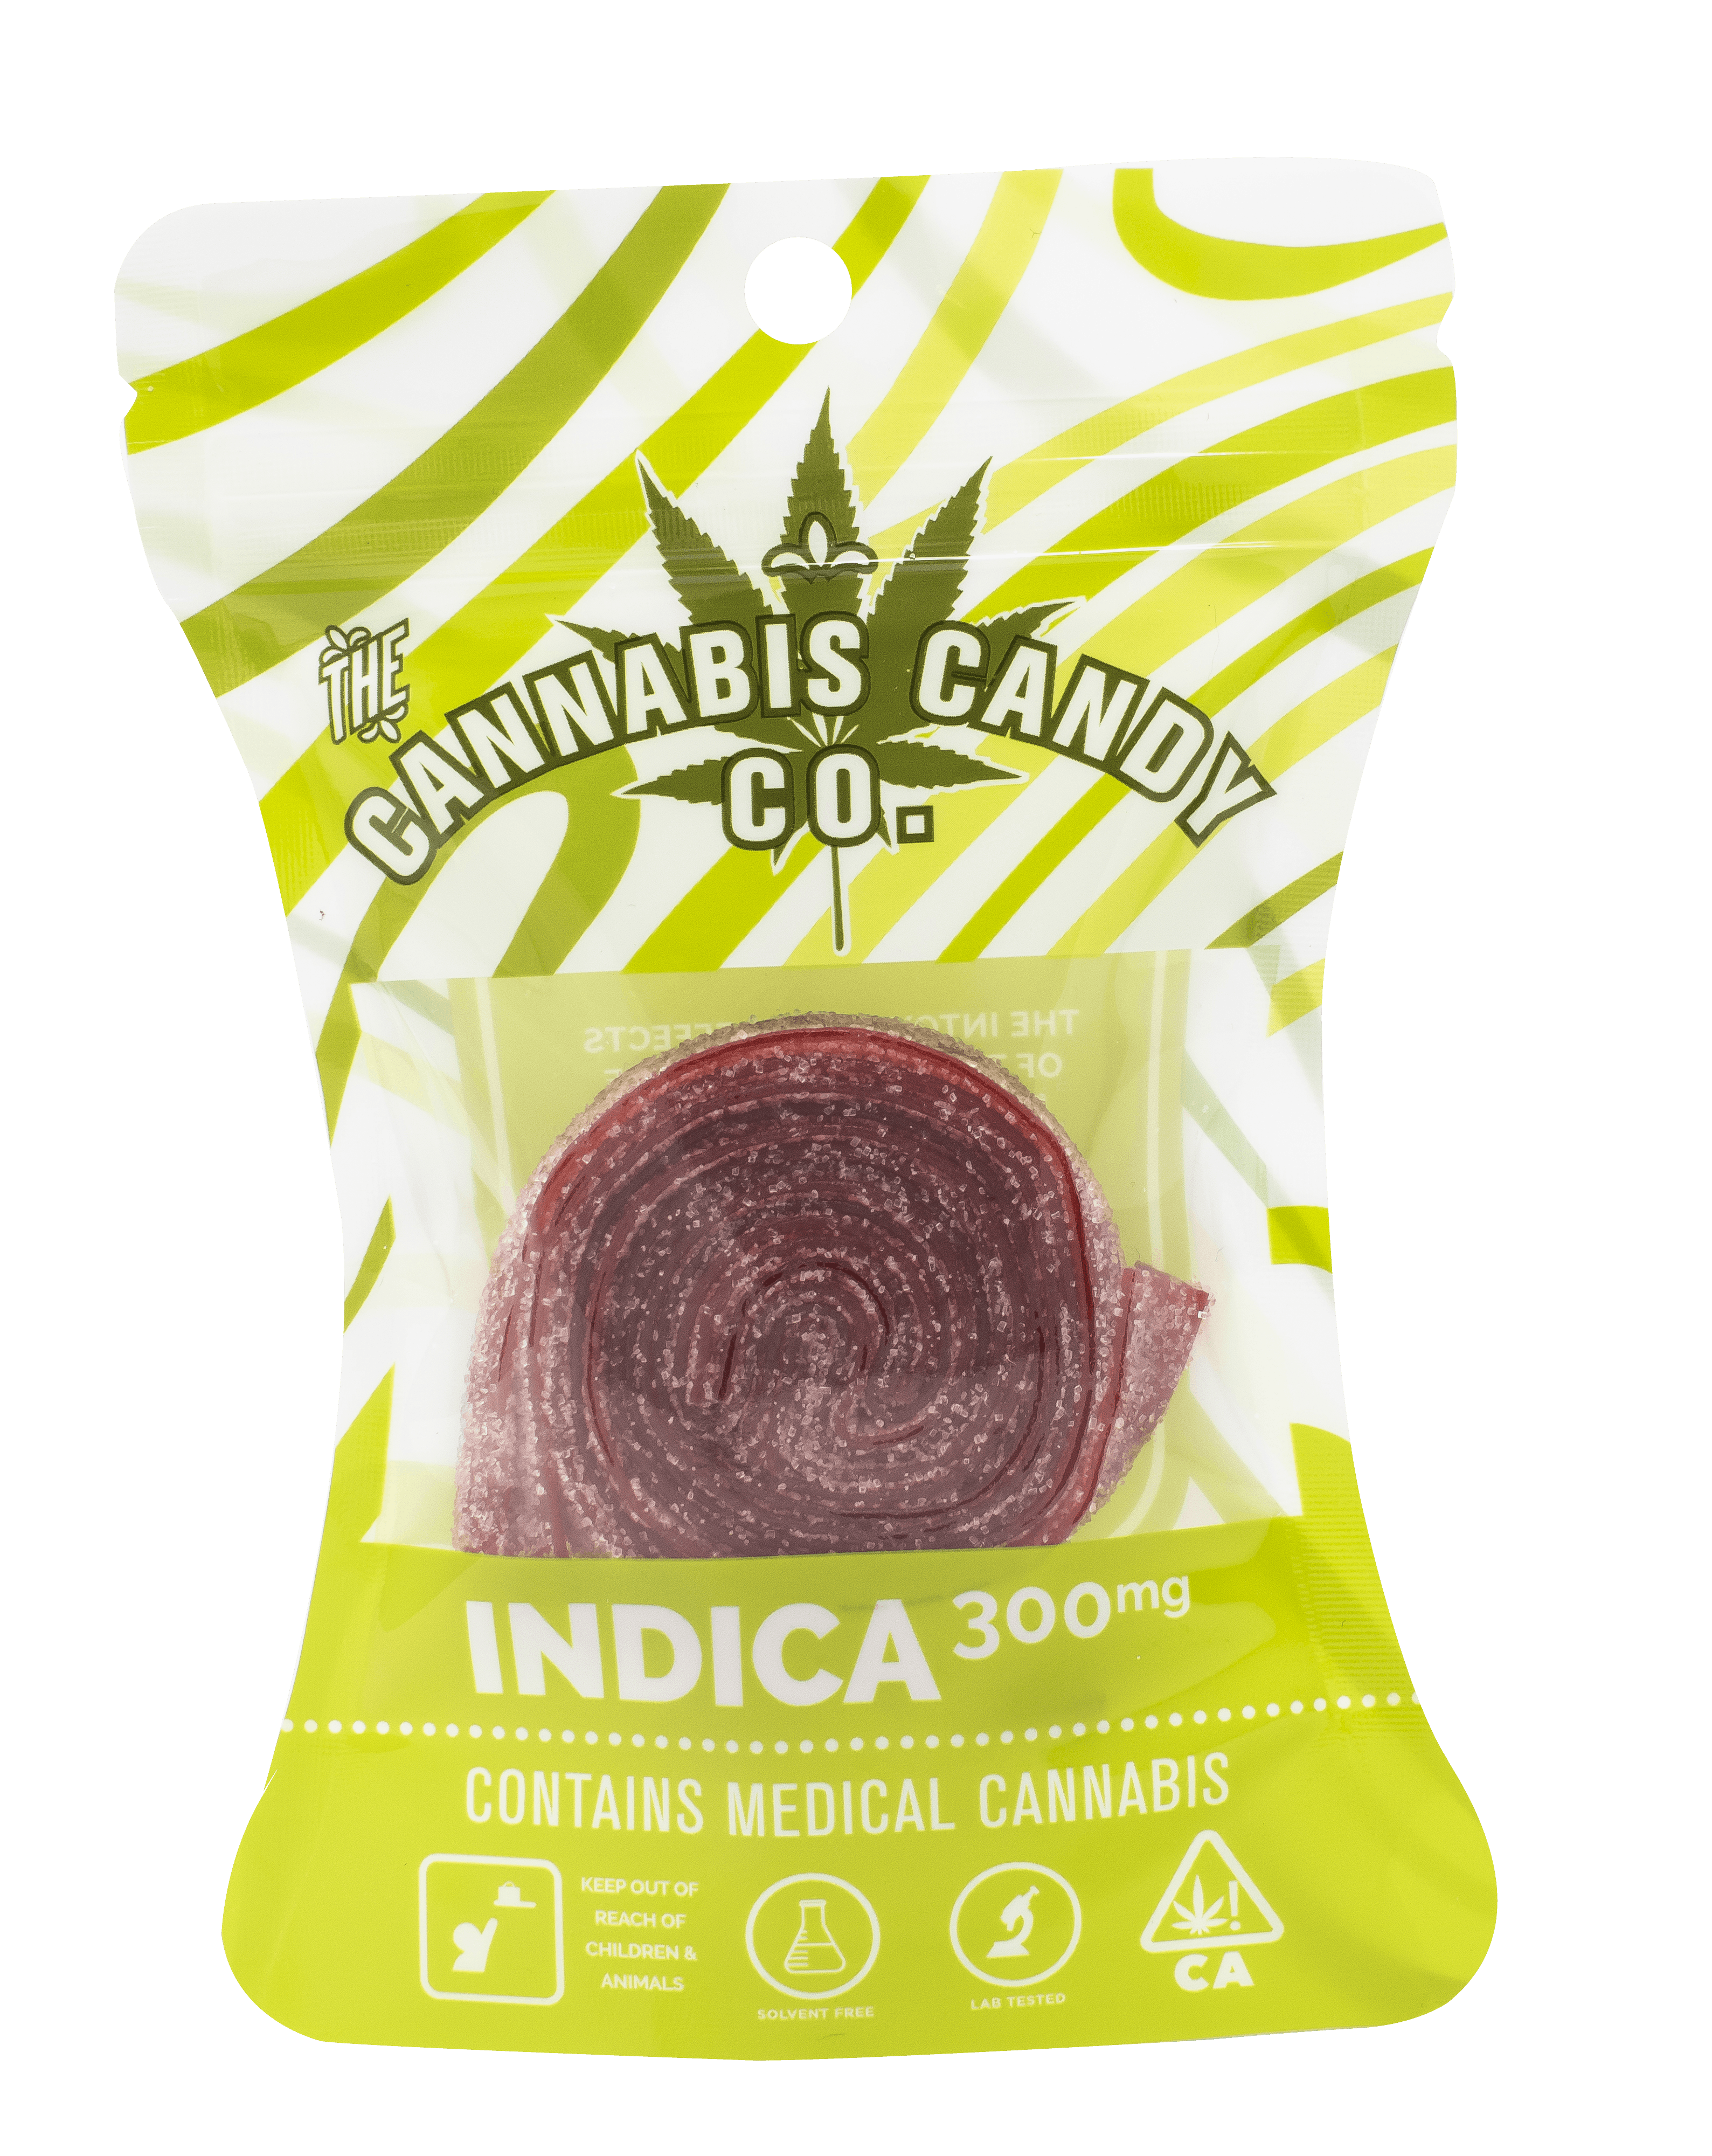 edible-the-cannabis-candy-co-indica-300mg